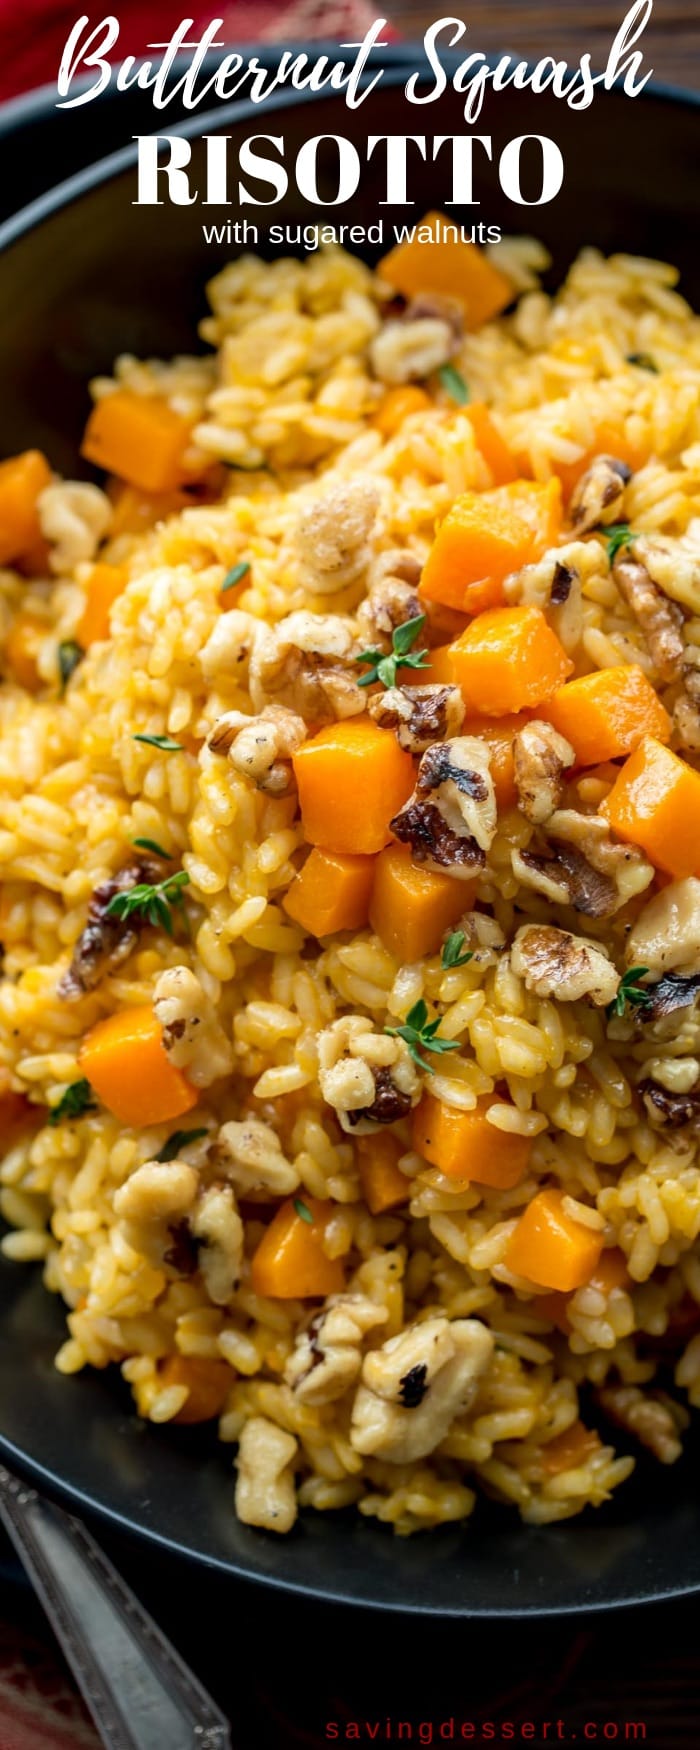 Butternut Squash Risotto with Sugared Walnuts - A delicious seasonal dish loaded with butternut squash, thyme and creamy Arborio rice.  Perfect as a hearty side or filling enough for a main dish. #savingroomfordessert #butternutsquash #squash #butternut #risotto 